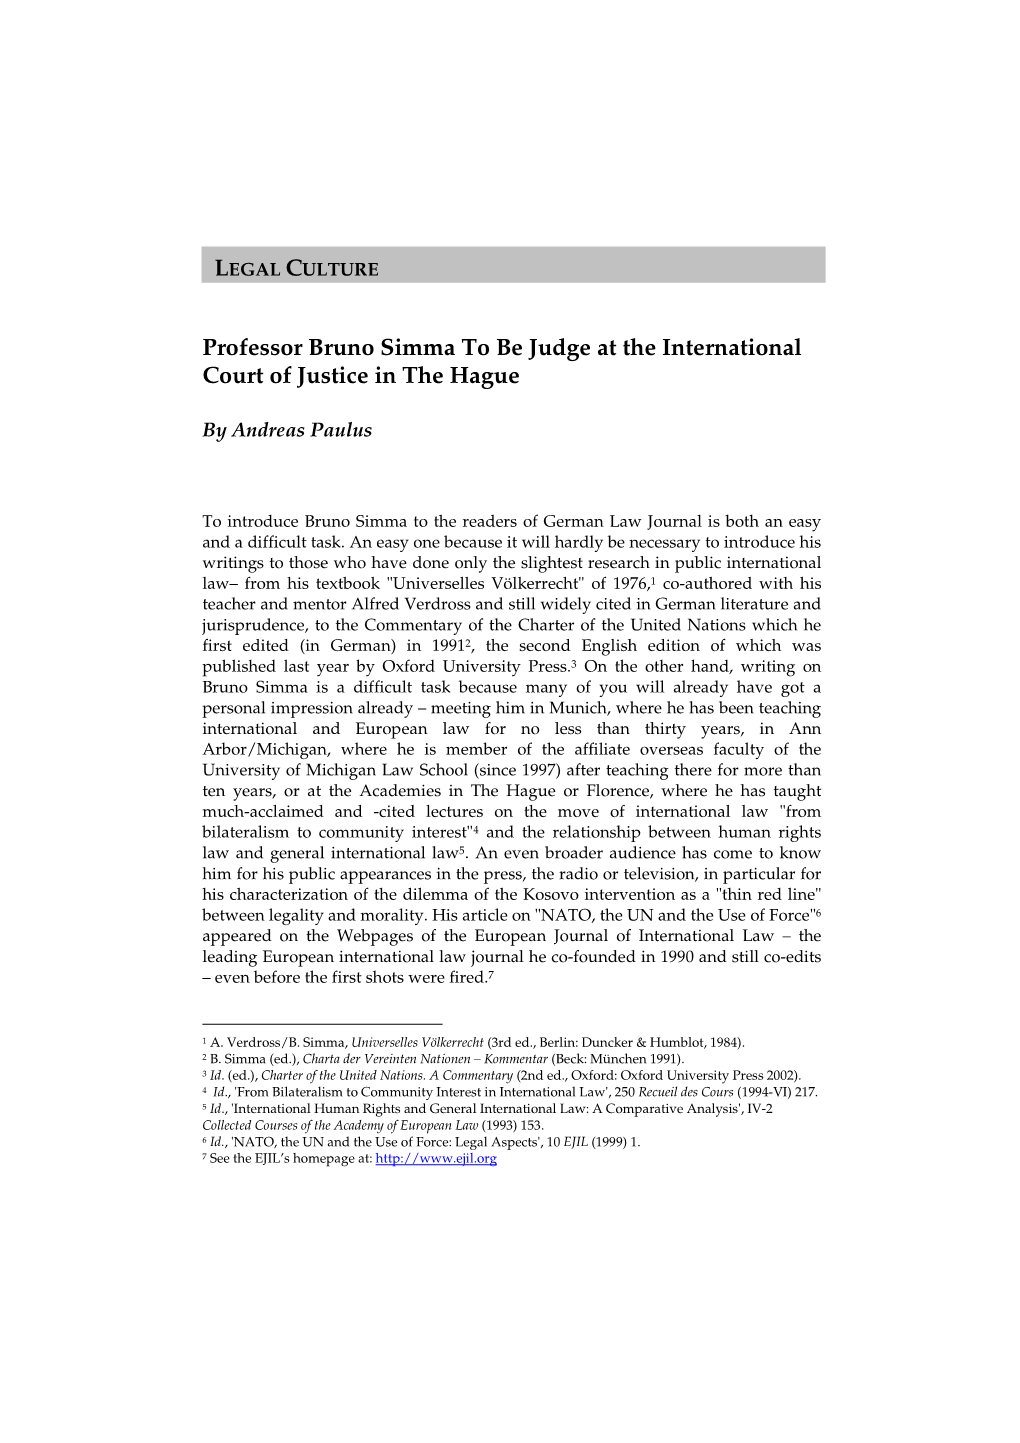 Professor Bruno Simma to Be Judge at the International Court of Justice in the Hague